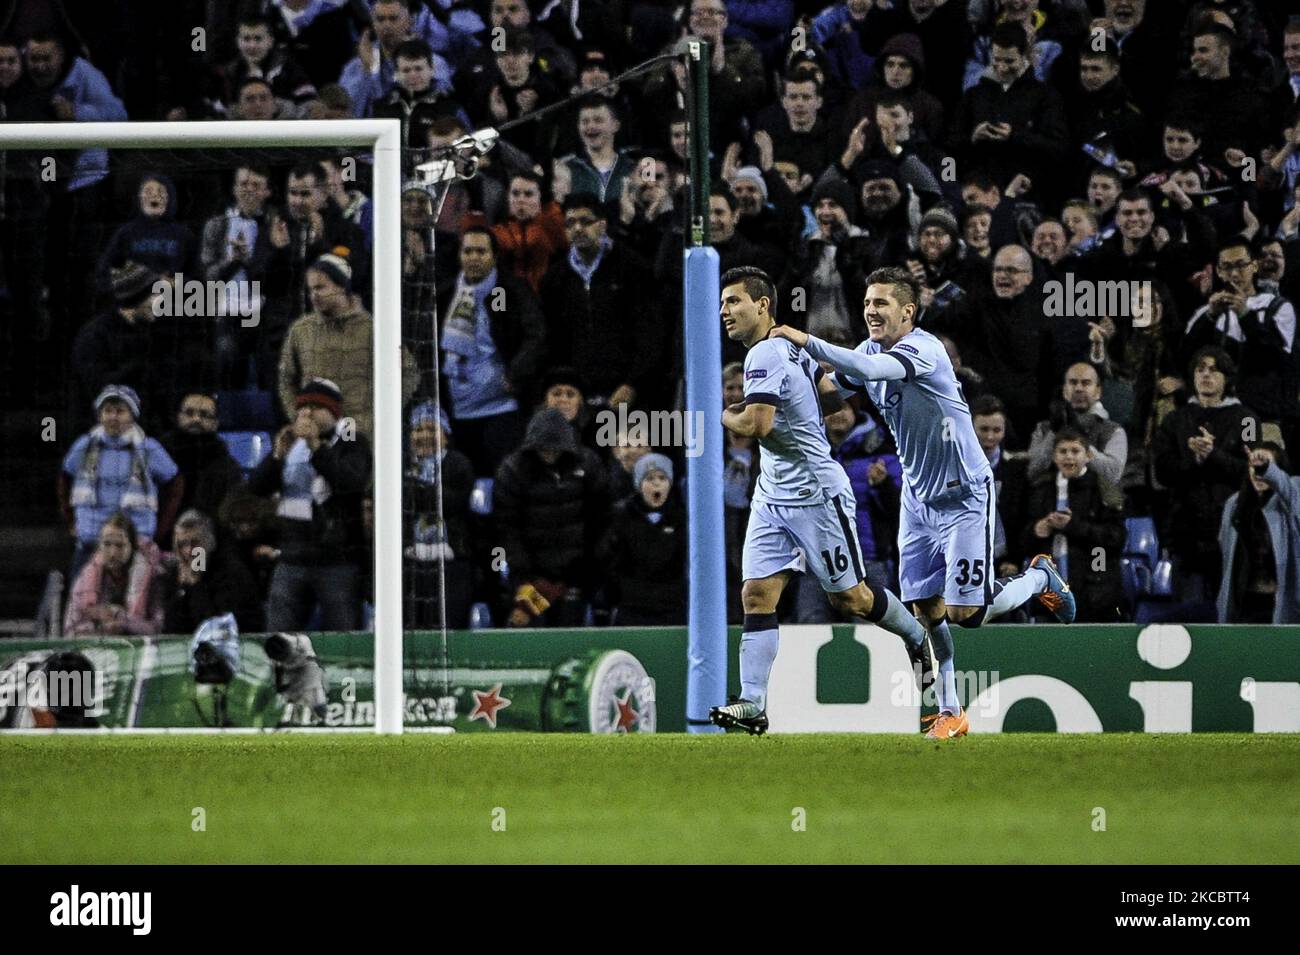 Man City forward Sergio Aguero is congratulated by Man City forward Stevan Jovetic after equalising during the UEFA Champions League, Group E match between Manchester City & Bayern Munich at the Etihad Stadium in Manchester on Wednesday November 25th 2014. (Photo by MI News/NurPhoto) Stock Photo